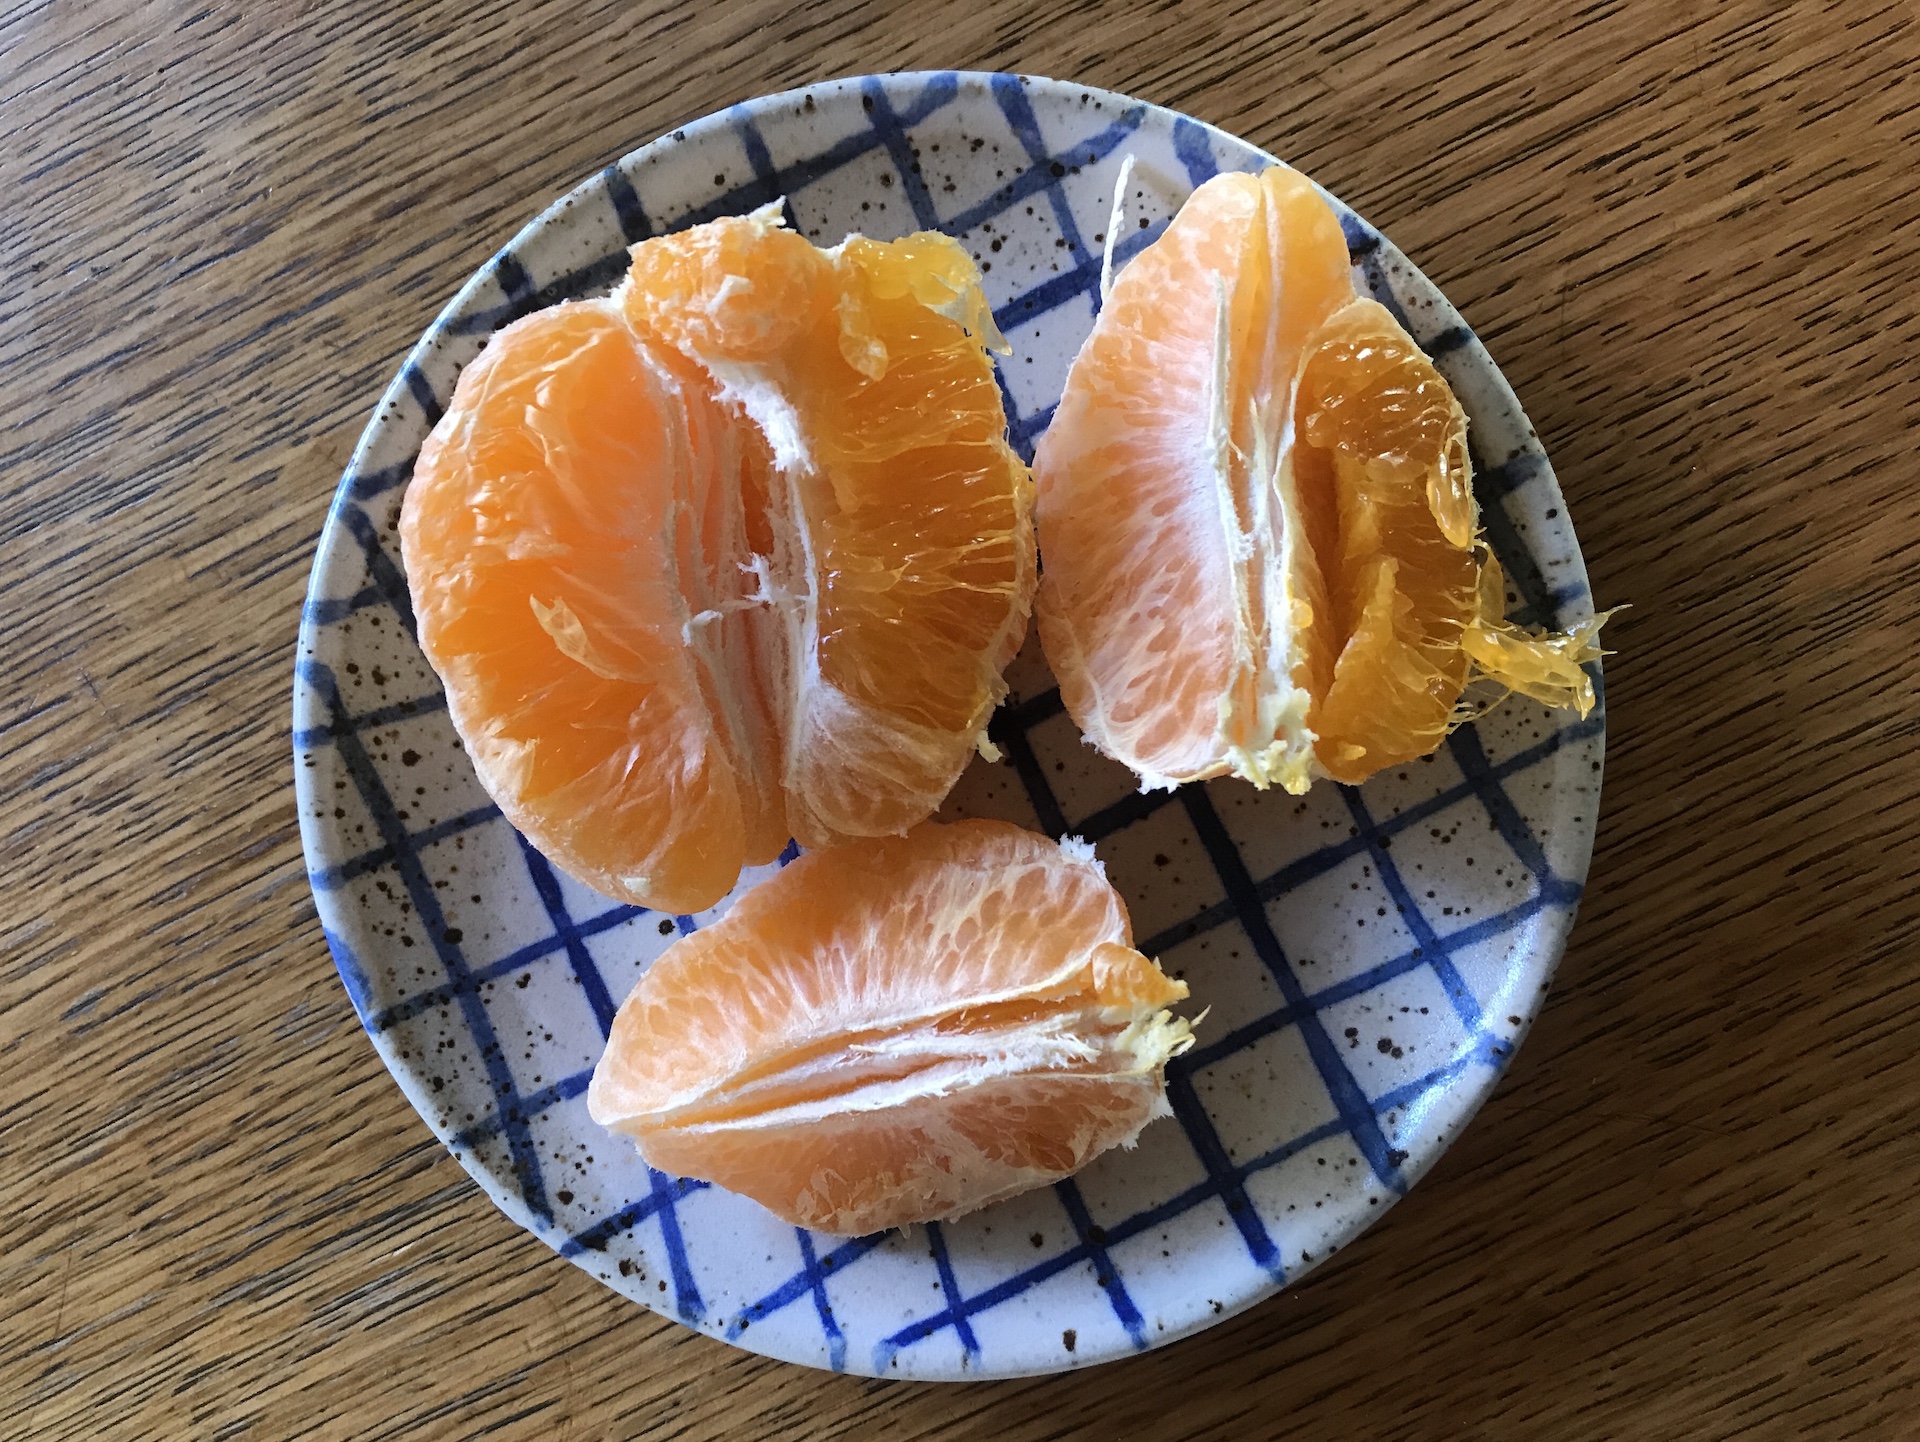 Spring means the last of the sweet oranges like Cara Caras and Sumos but there's plenty to do with them before they're gone.